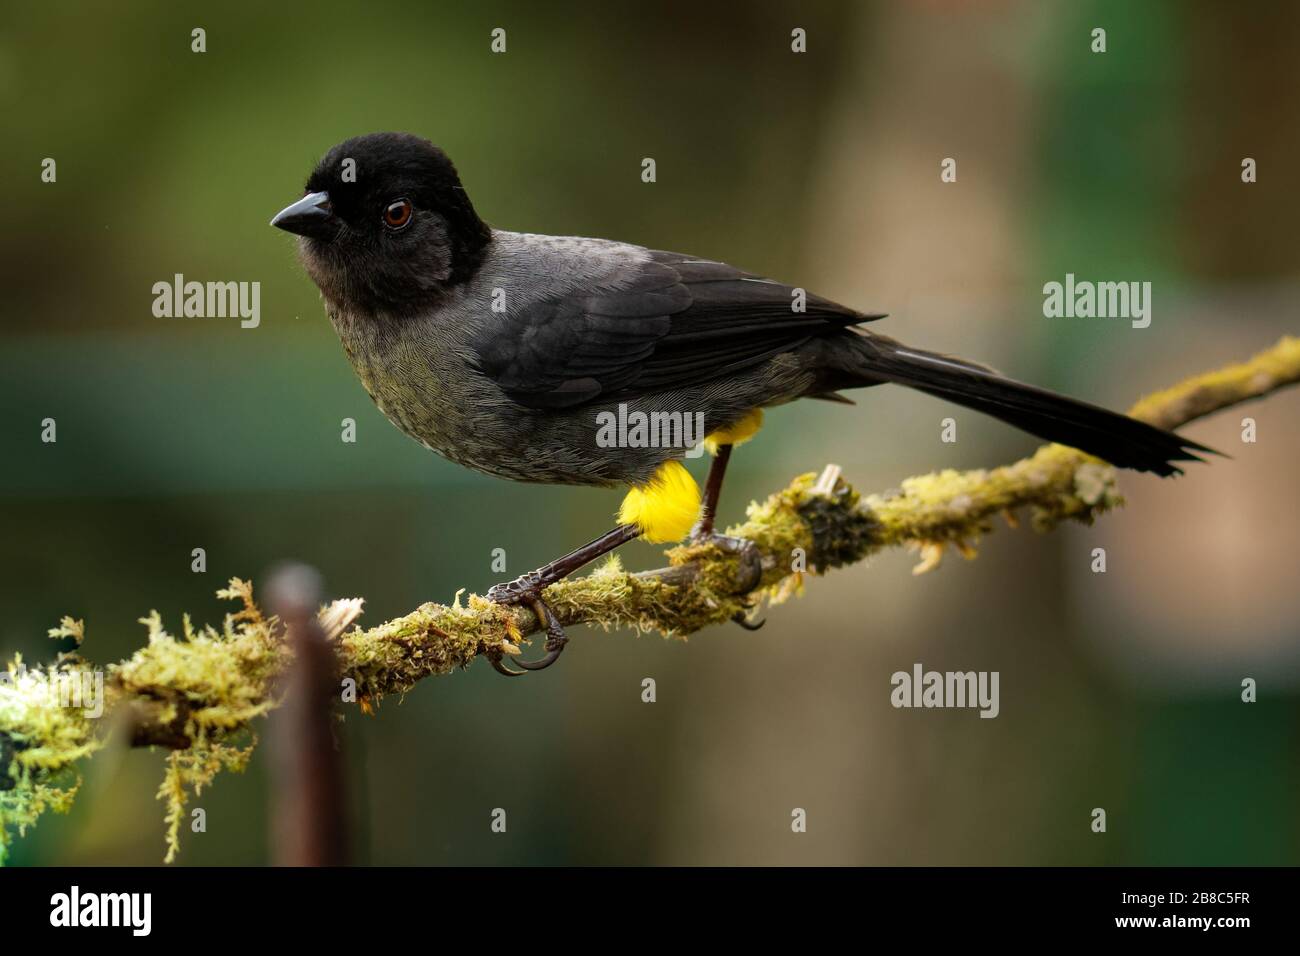 Yellow-thighed Finch - Pselliophorus tibialis is passerine bird which is endemic to the highlands of Costa Rica and western Panama. Black bird with ye Stock Photo